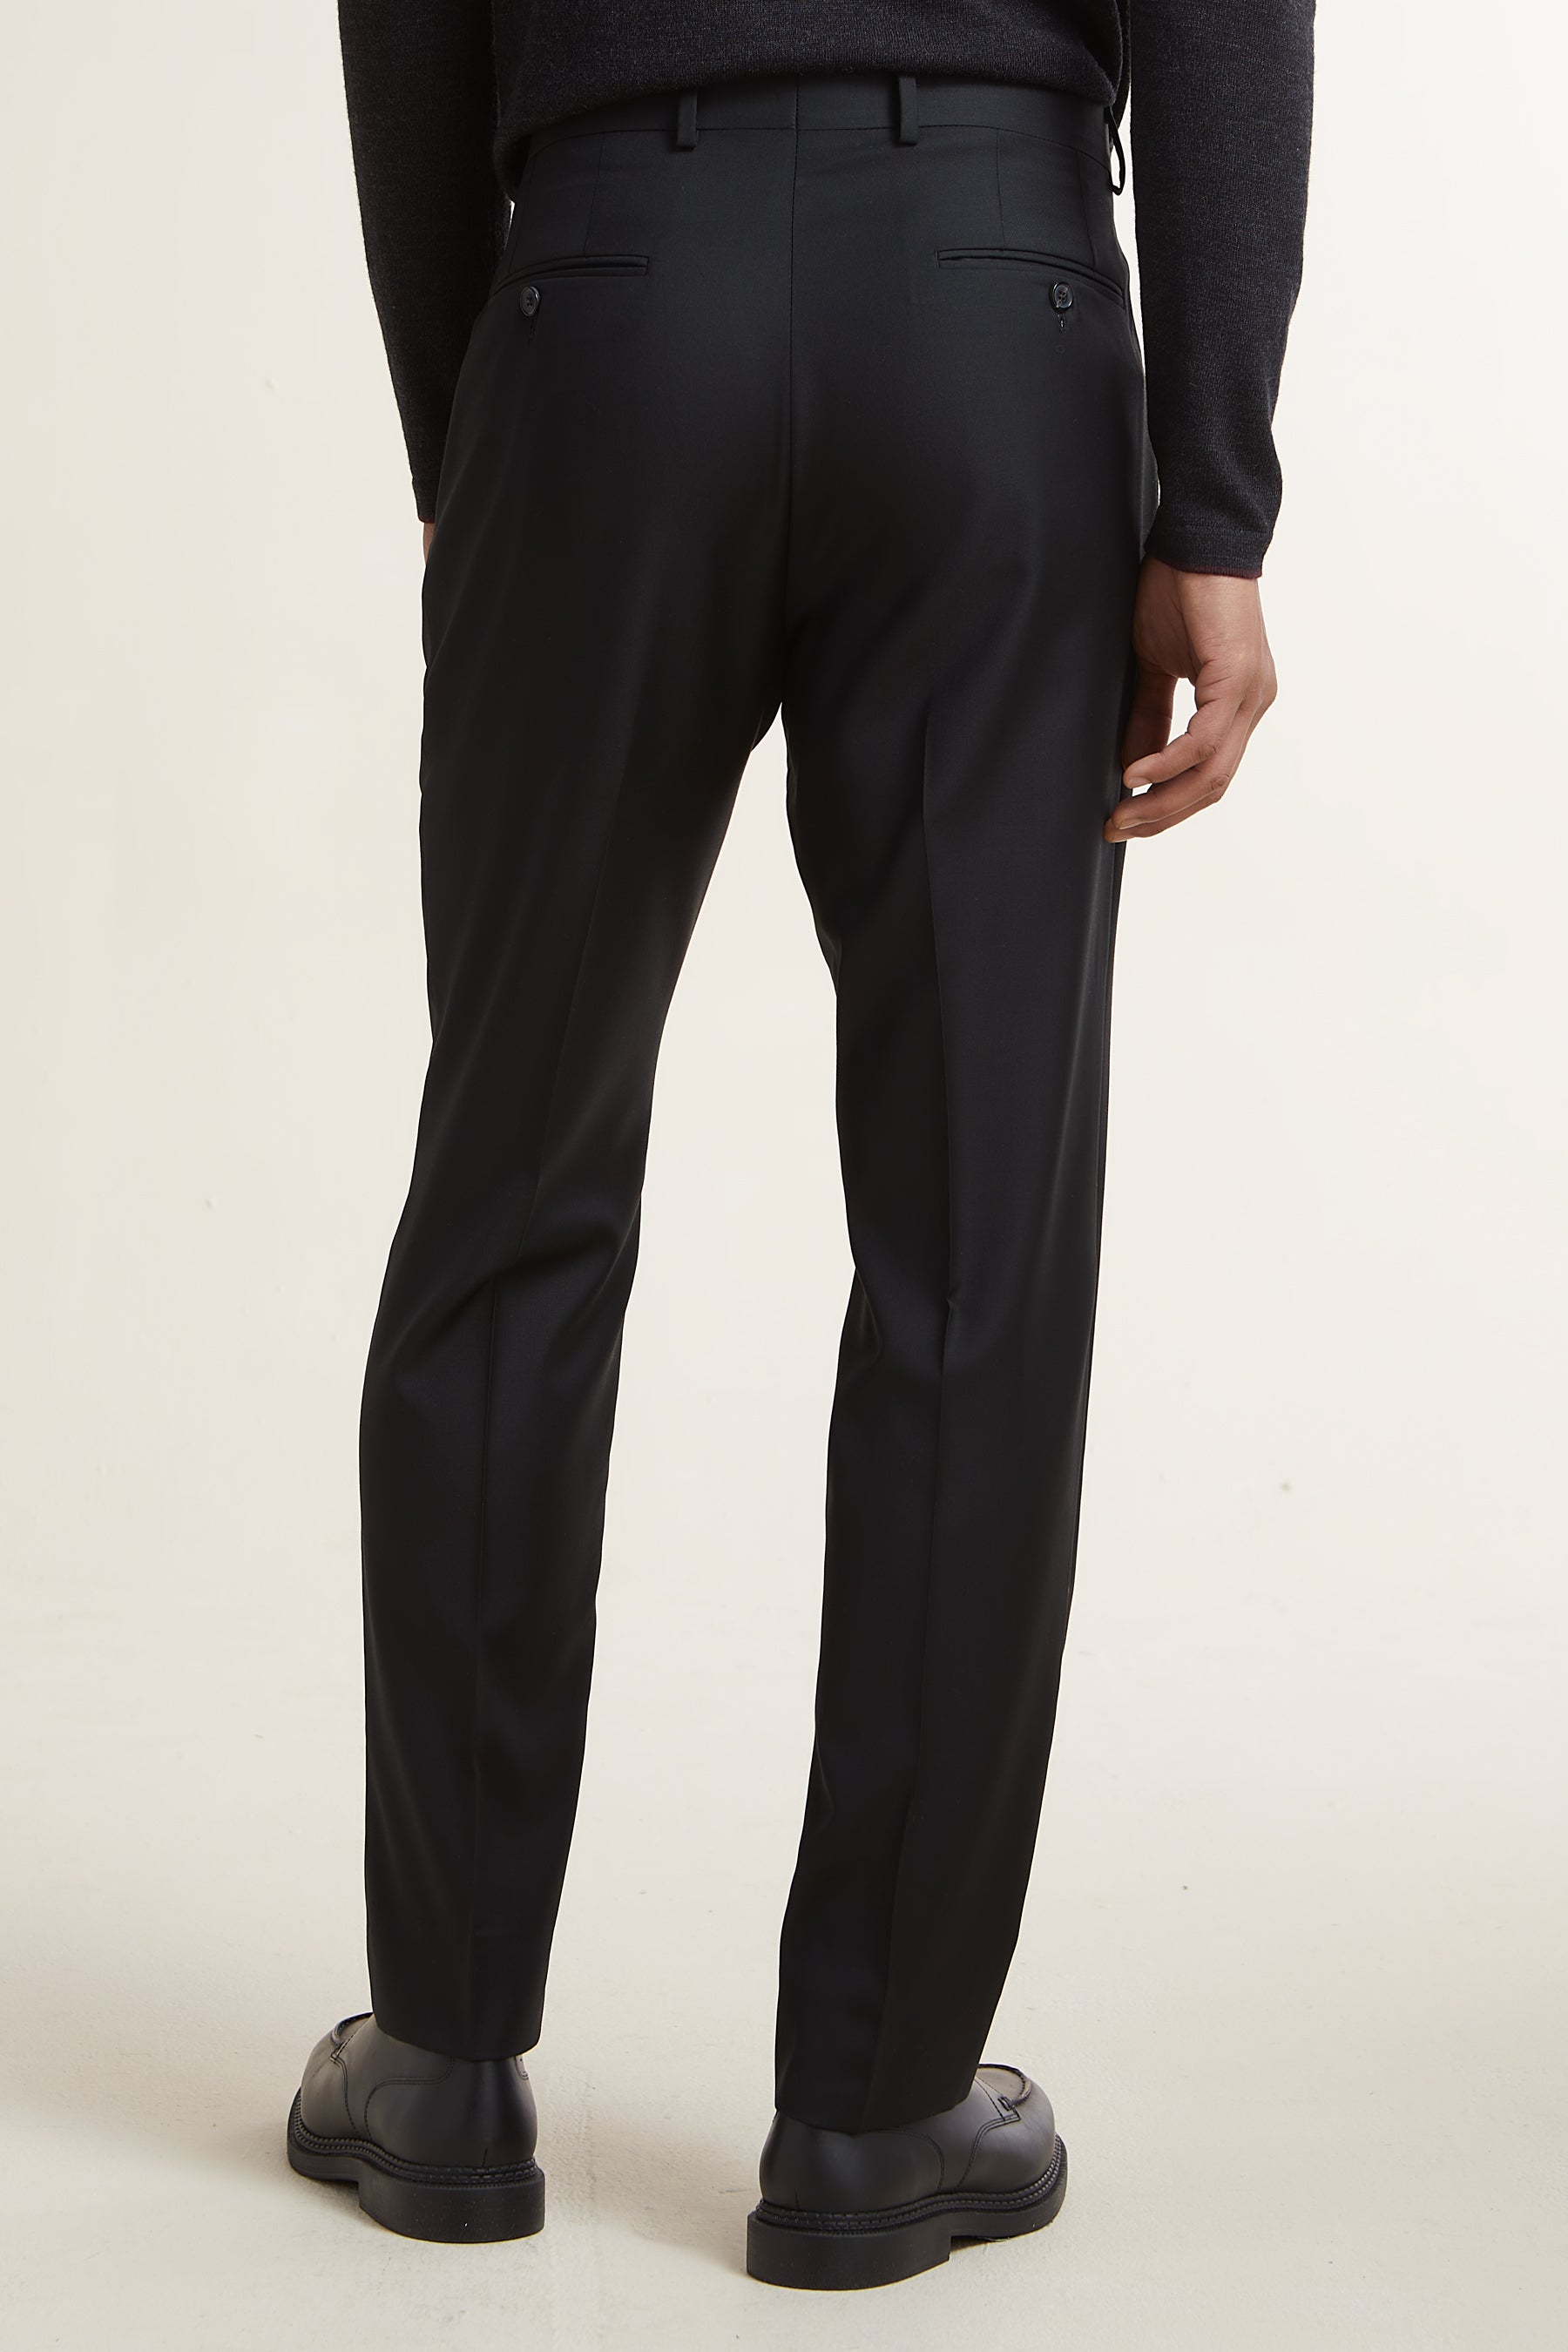 Men's Guide to Wearing Pleated and Flat-Front Pants – Venfield